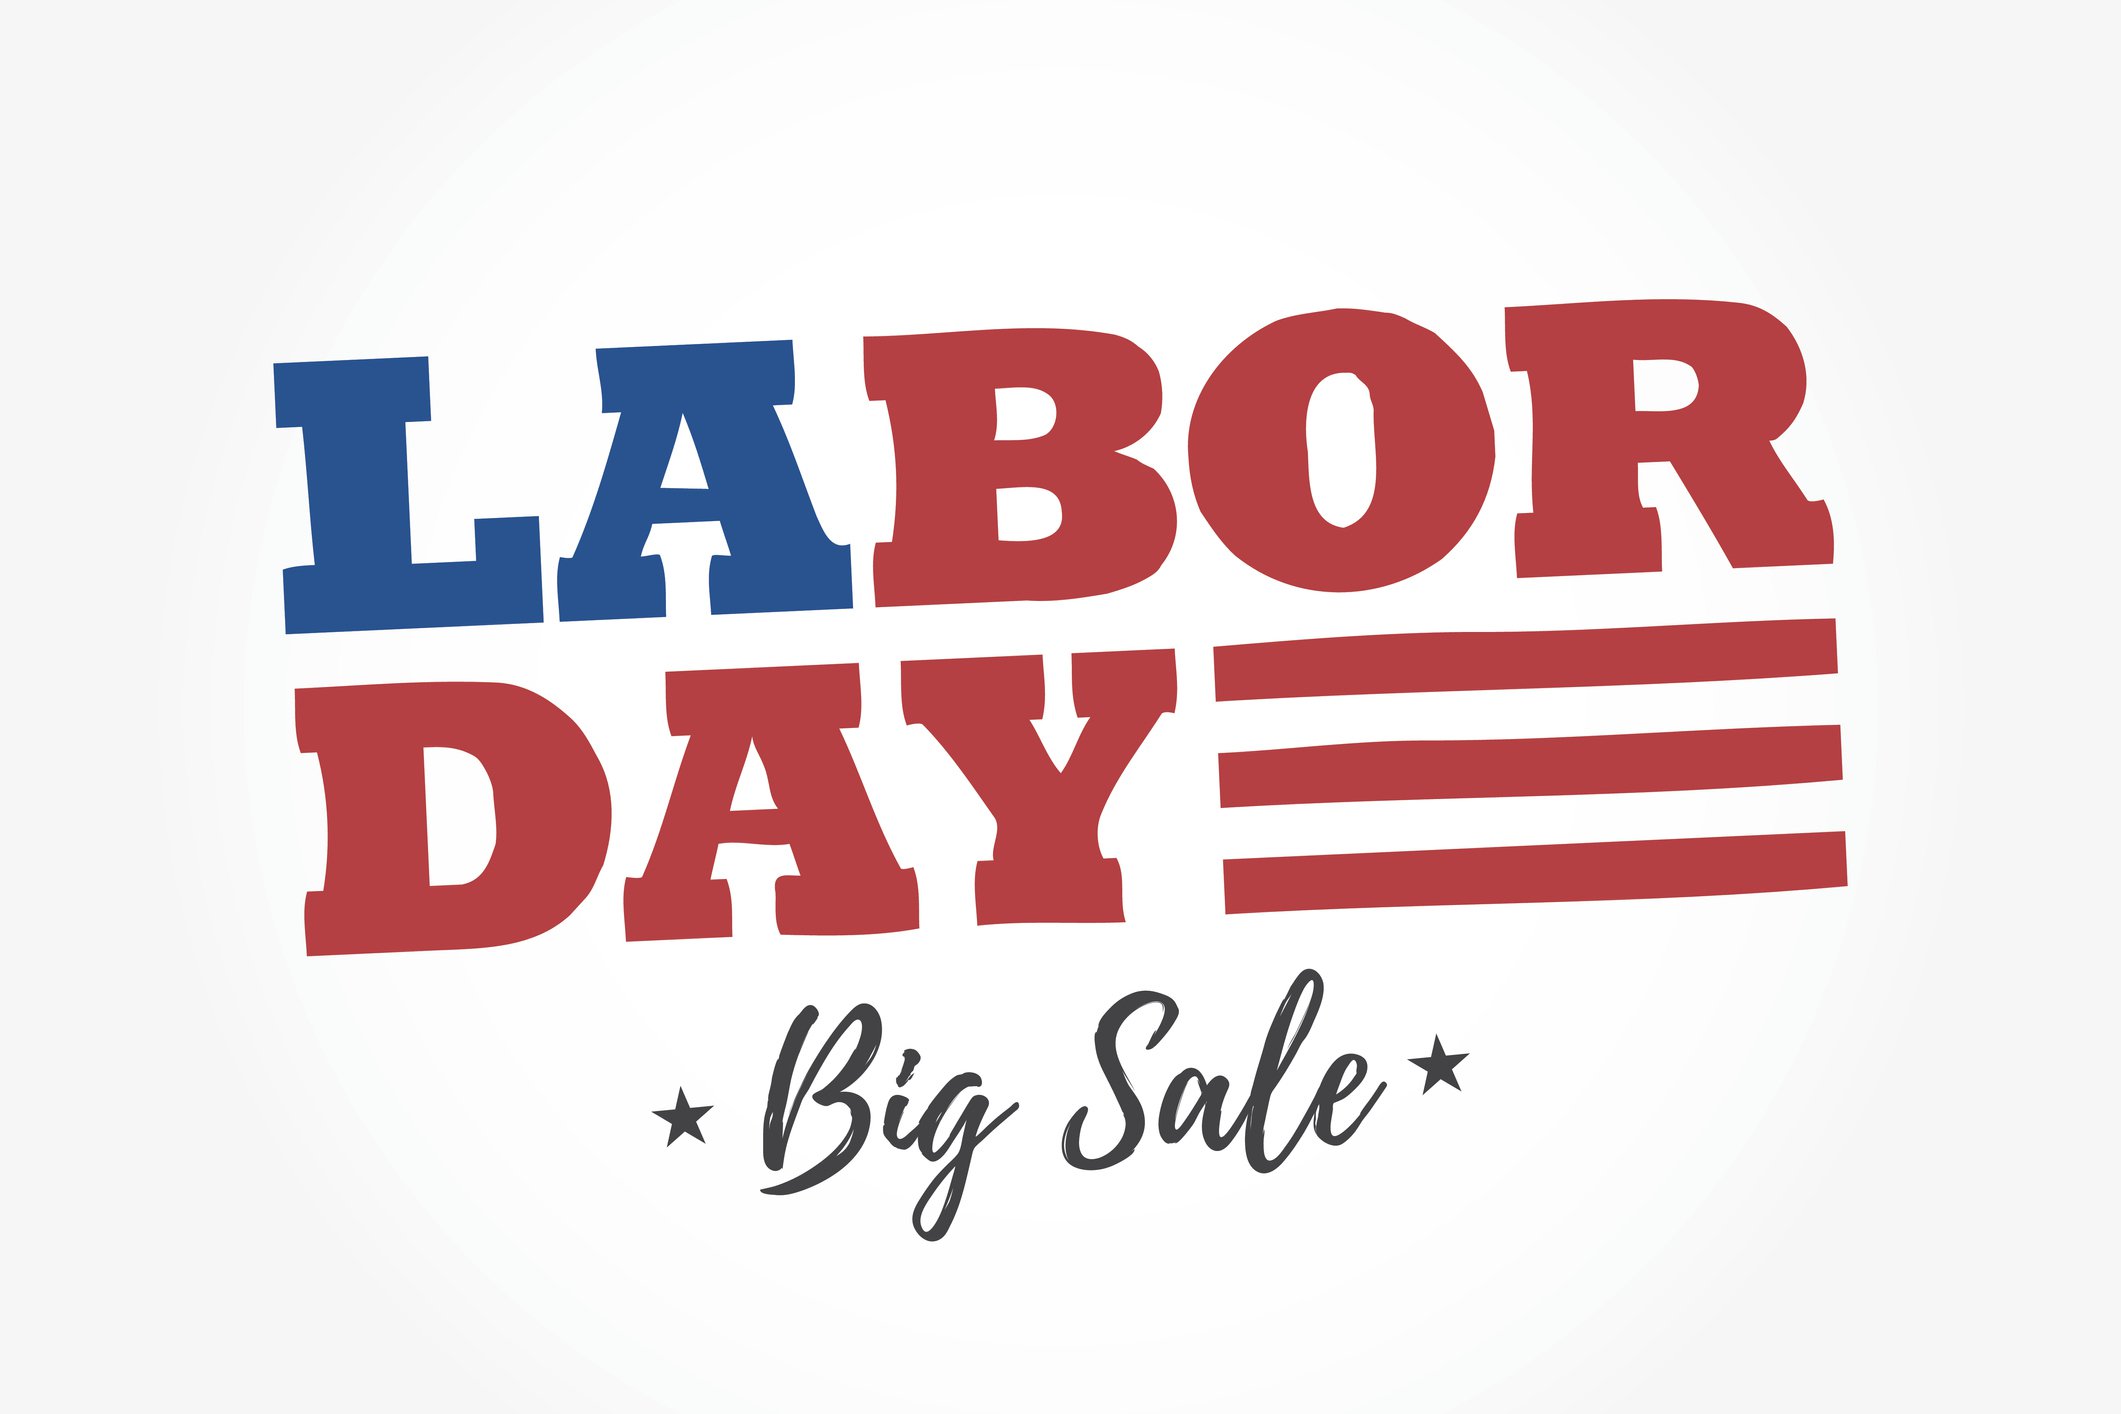 Labor Day Sale Ends Tuesday! Check Out Our Deals For The Long